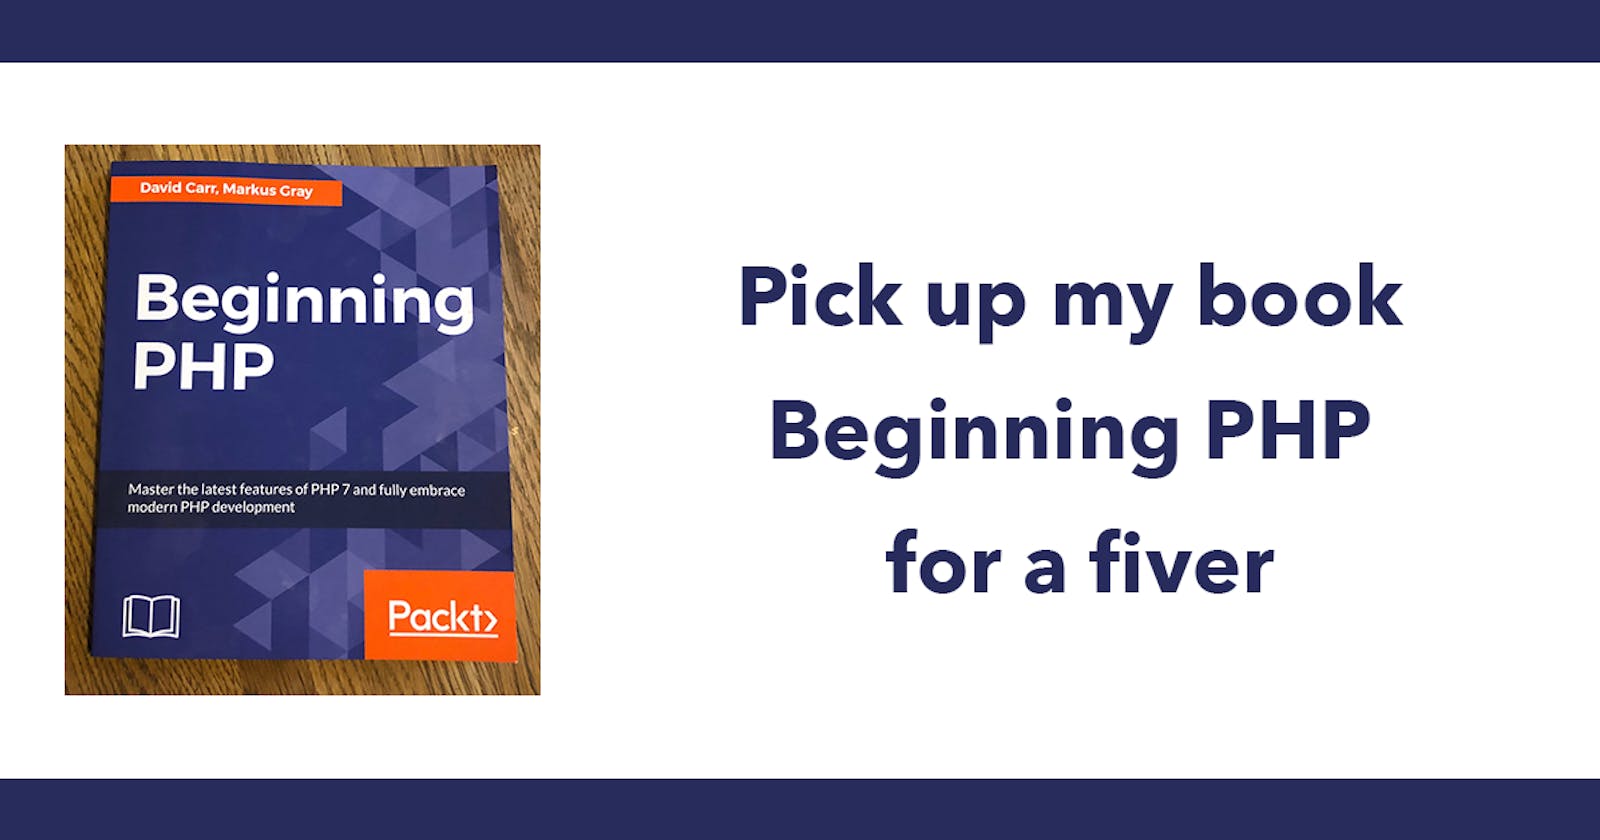 Pick up my book Beginning PHP for a fiver